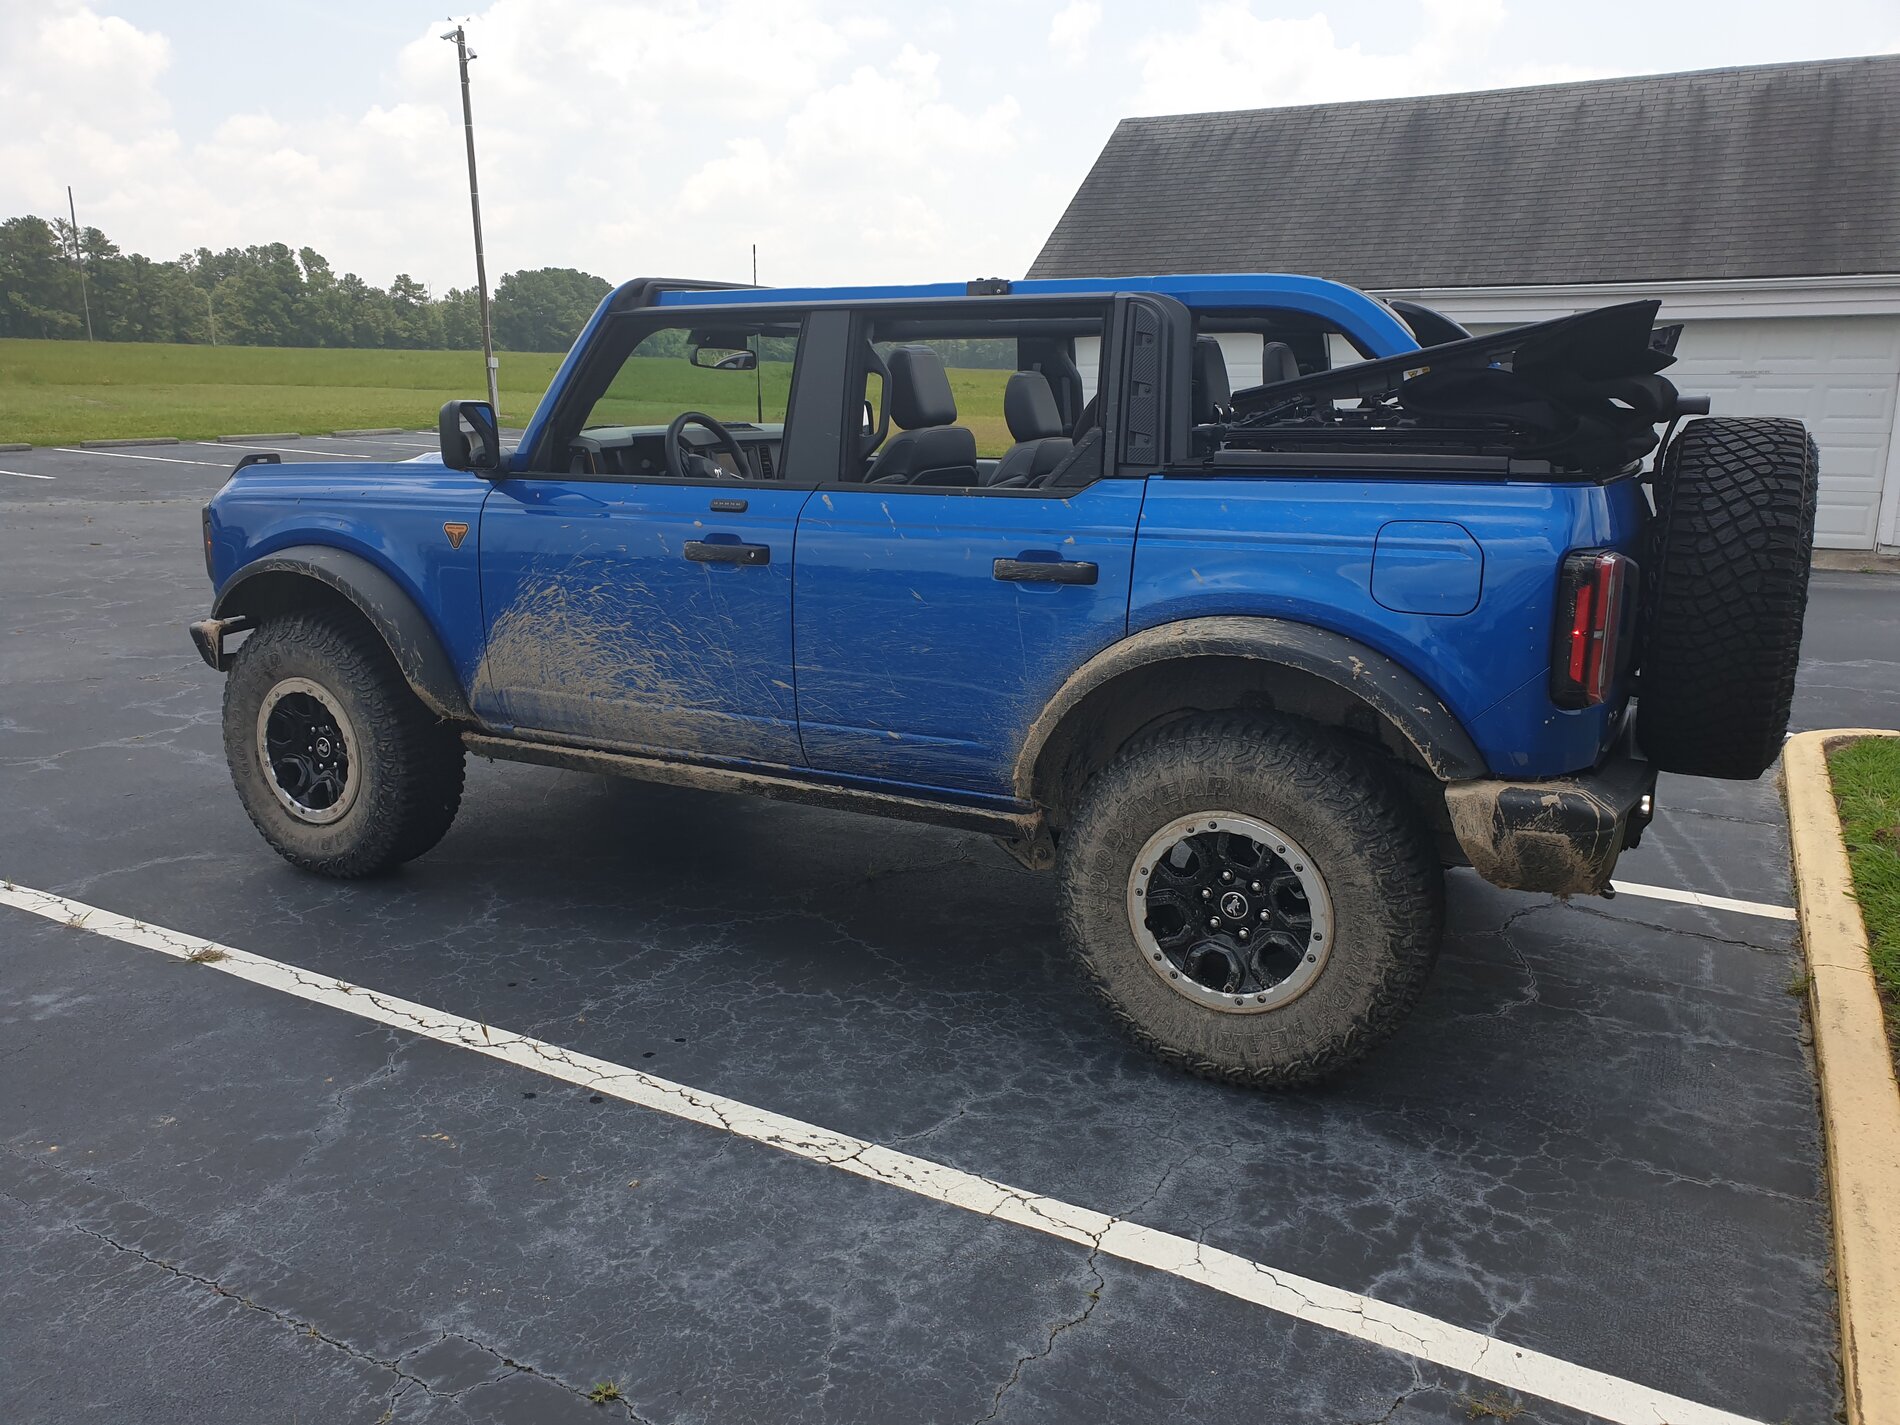 Ford Bronco First 24 hrs in my Badlands Sasquatch 4dr 2.7L Velocity Blue Soft Top (w/ Rear Cargo Enclosure review) 20210722_134706